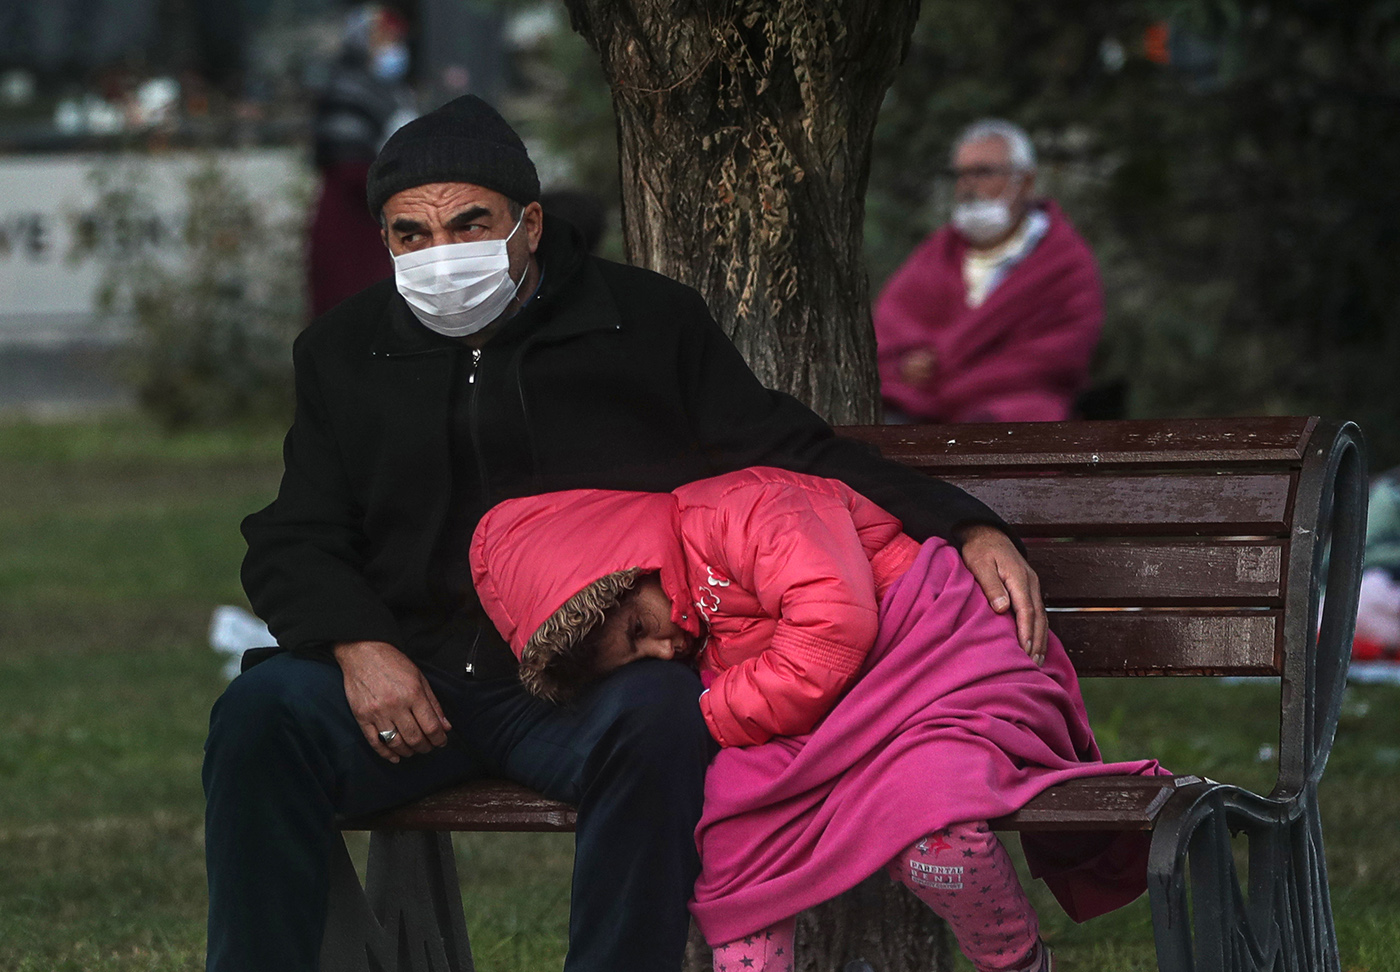 A man and a girl sit on a bench at a park after a 7.0 magnitude earthquake in the Aegean Sea, at Bayrakli district in Izmir, Turkey, 31 October 2020. According to Turkish media reports, at least twenty four people died while more than eight  hundreds were injured and dozens of buildings were destroyed in the earthquake.